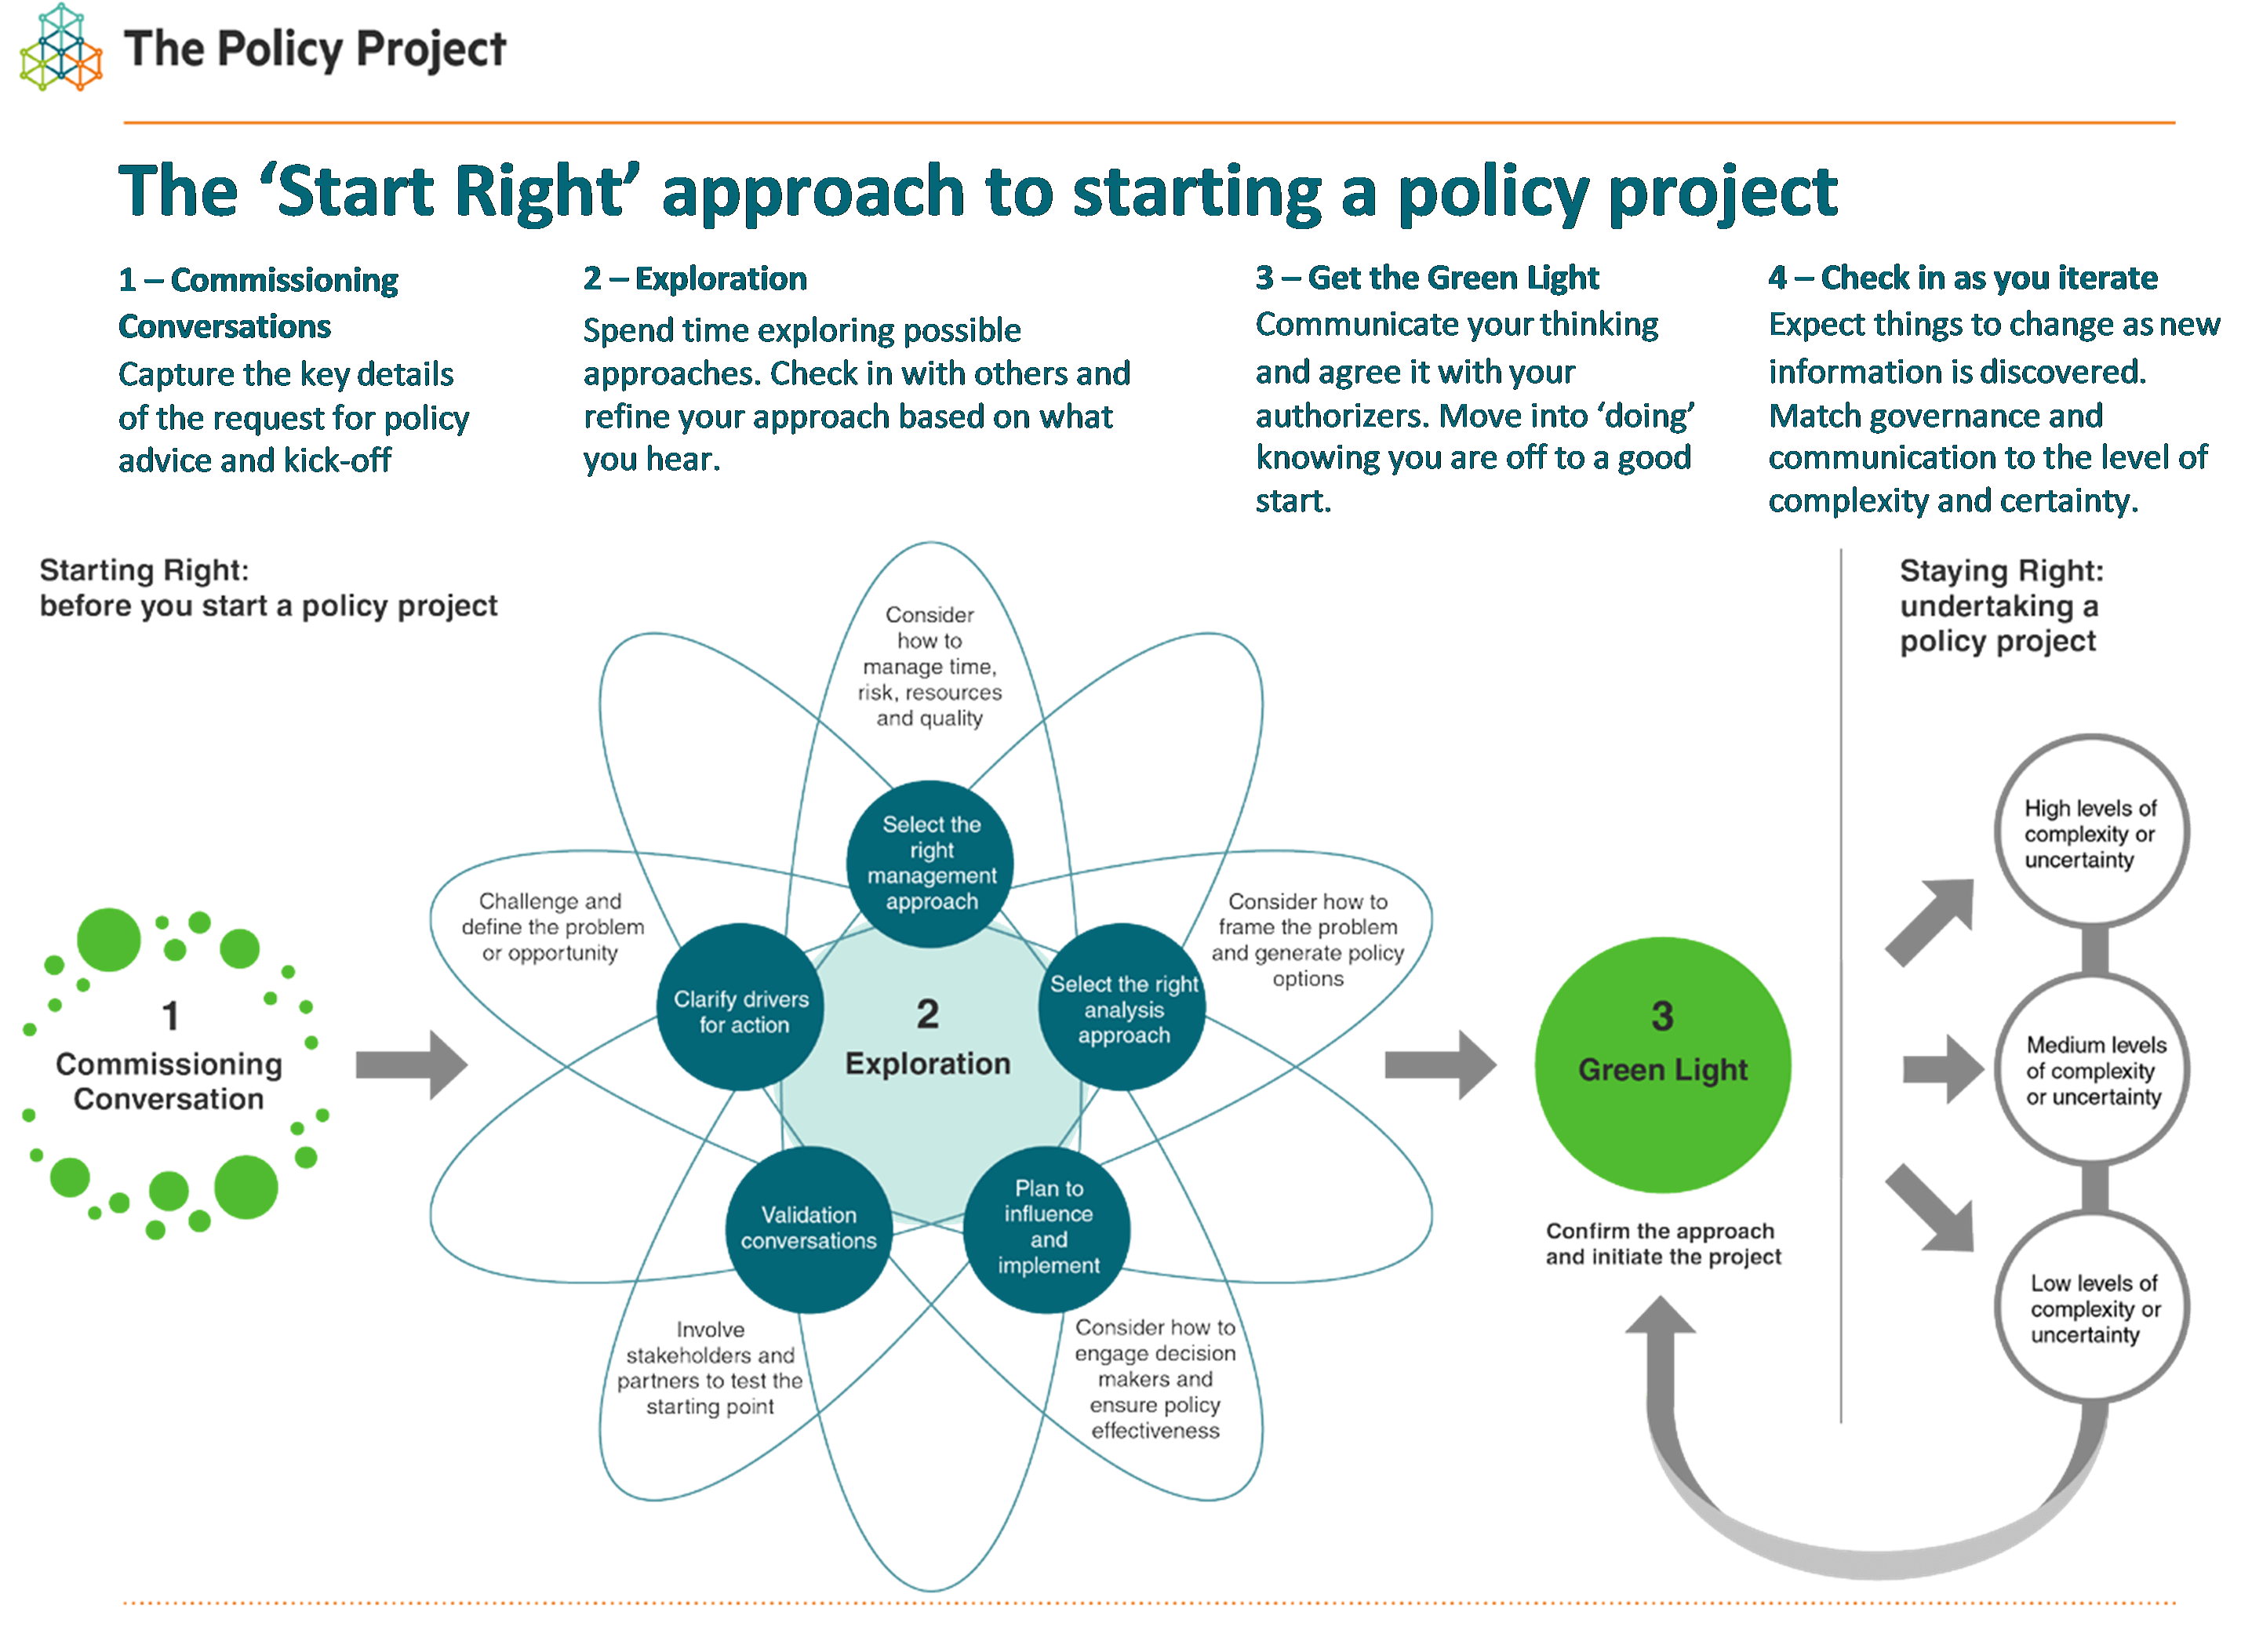 The Policy Project's 'start Right' approach and diagram